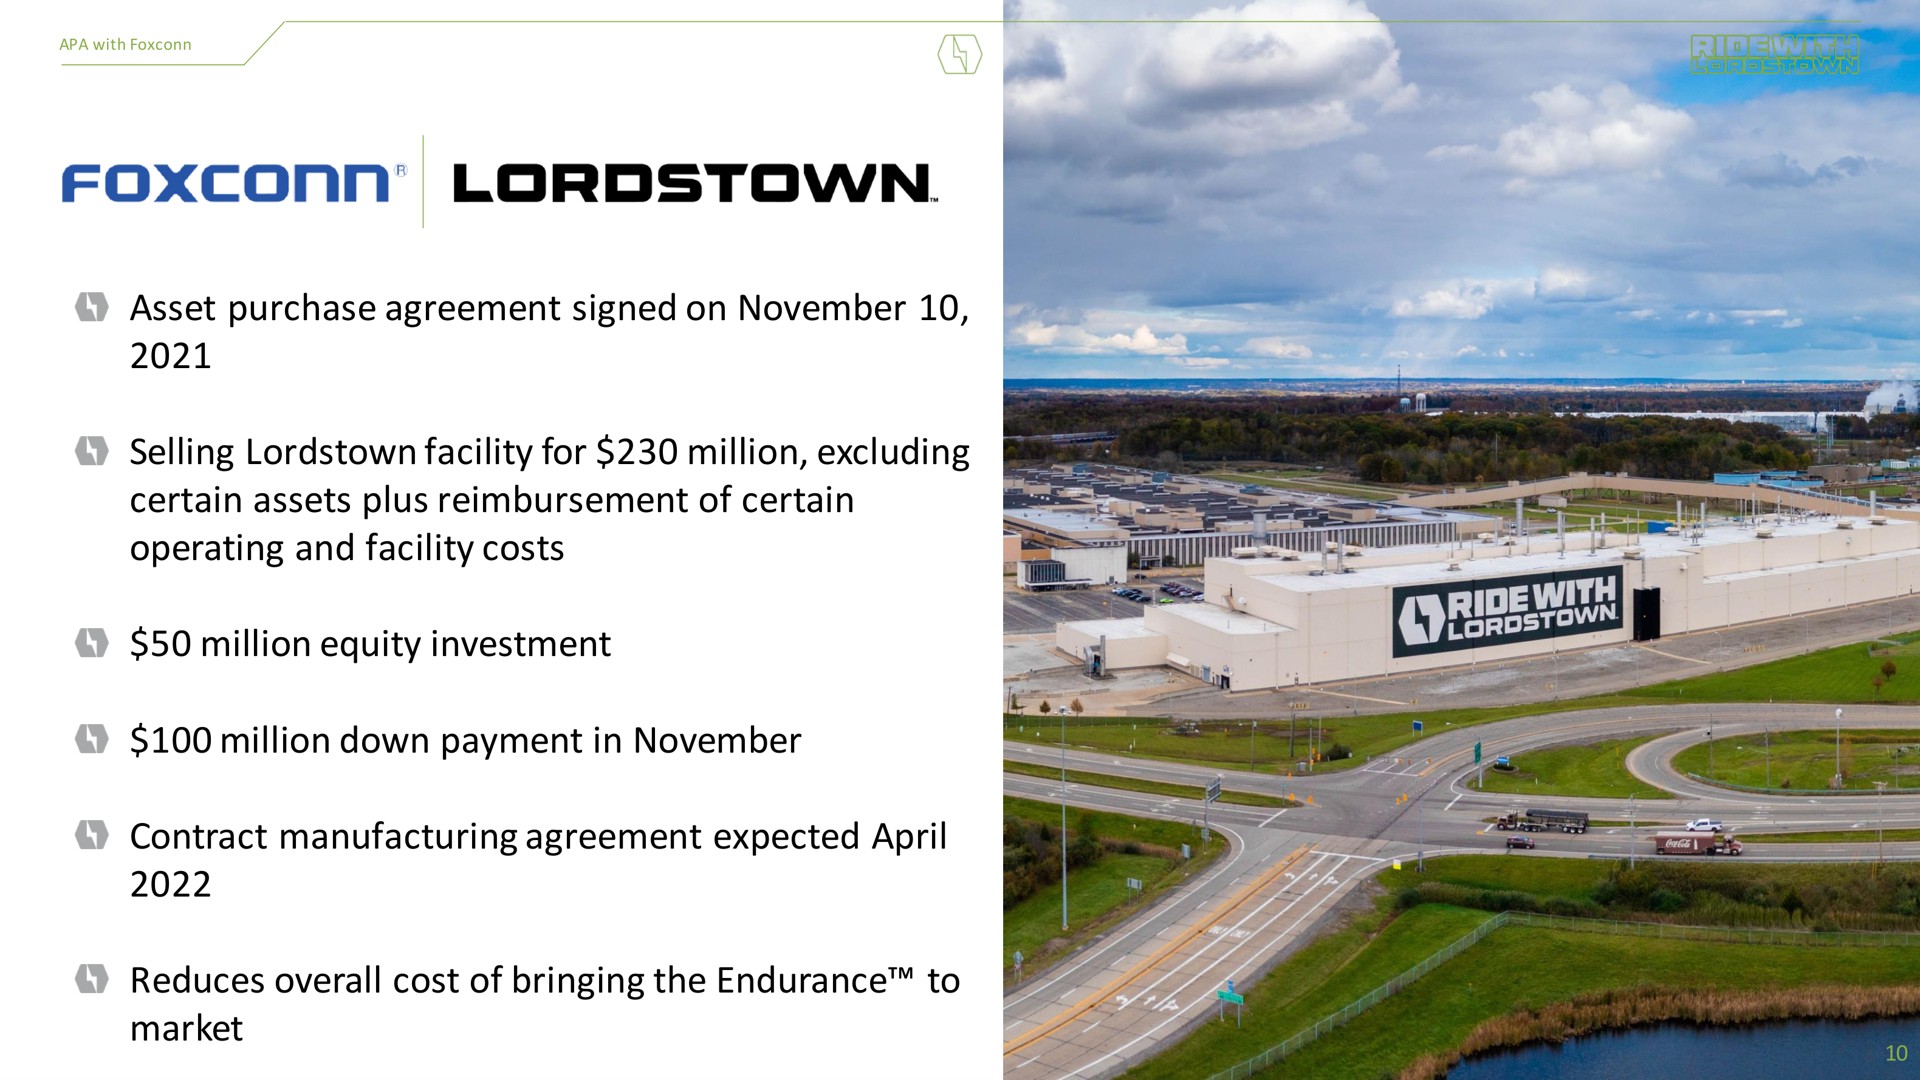 asset purchase agreement signed on selling facility for million excluding certain assets plus reimbursement of certain operating and facility costs million equity investment million down payment in contract manufacturing agreement expected reduces overall cost of bringing the endurance to market | Lordstown Motors